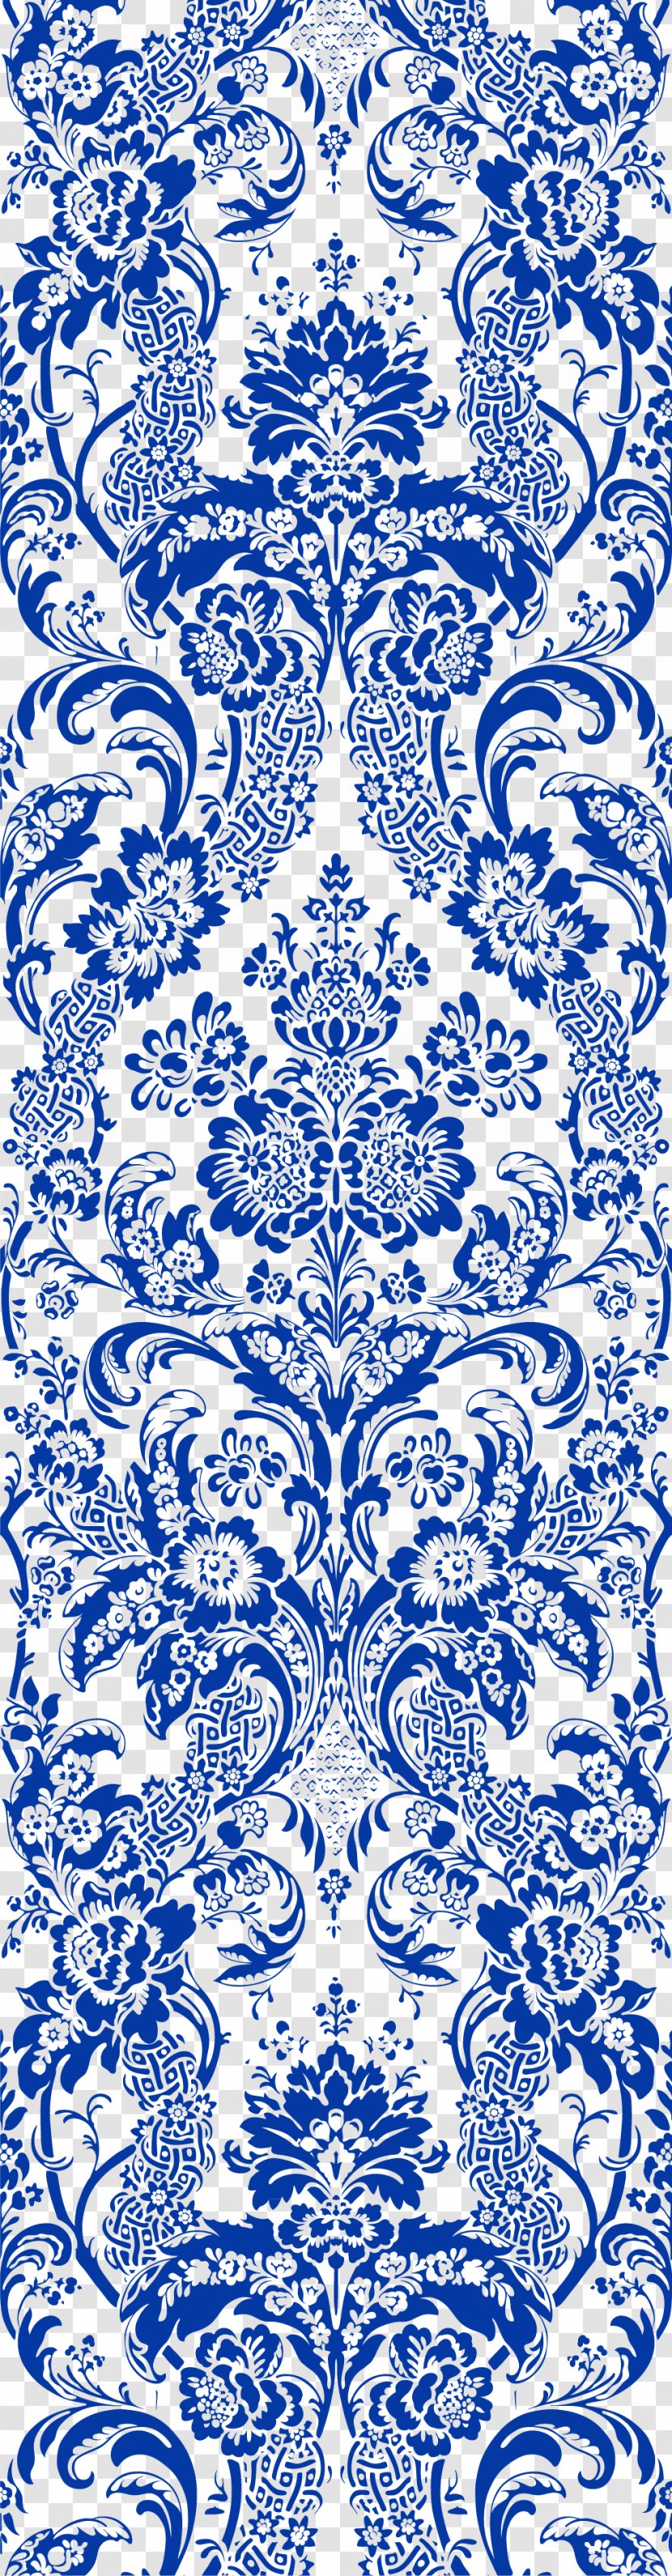 Huadi Blue And White Pottery Moutan Peony - Monochrome - Classical Chinese Porcelain Pattern Shading Transparent PNG